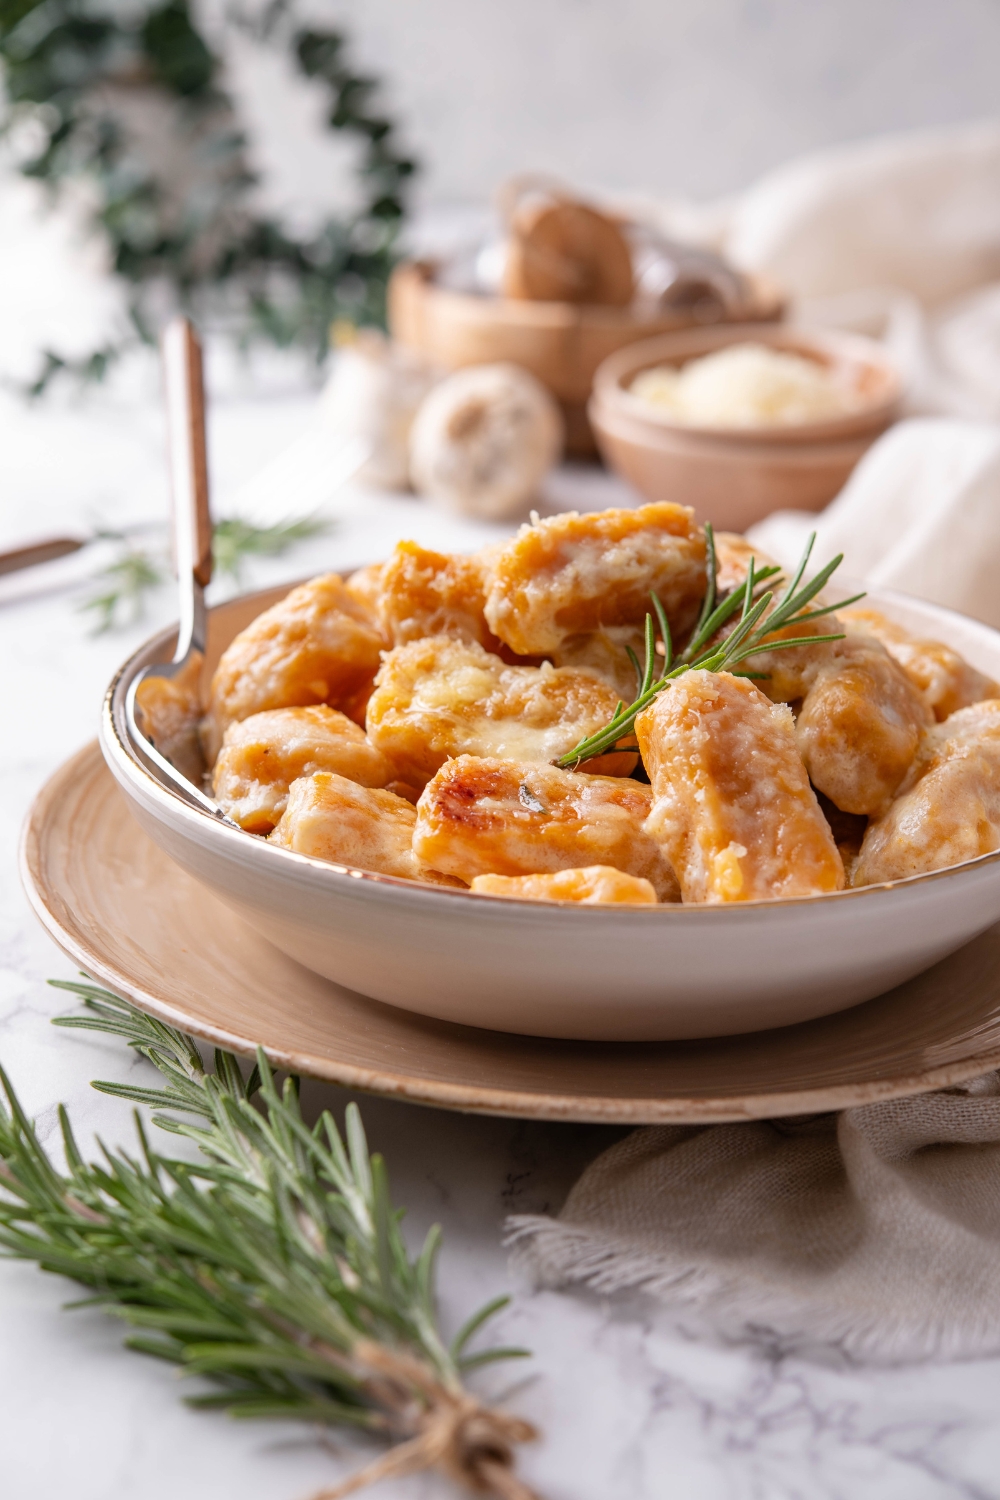 A bowl of sweet potato gnocchi covered in cream sauce with a sprig of rosemary garnished on top.